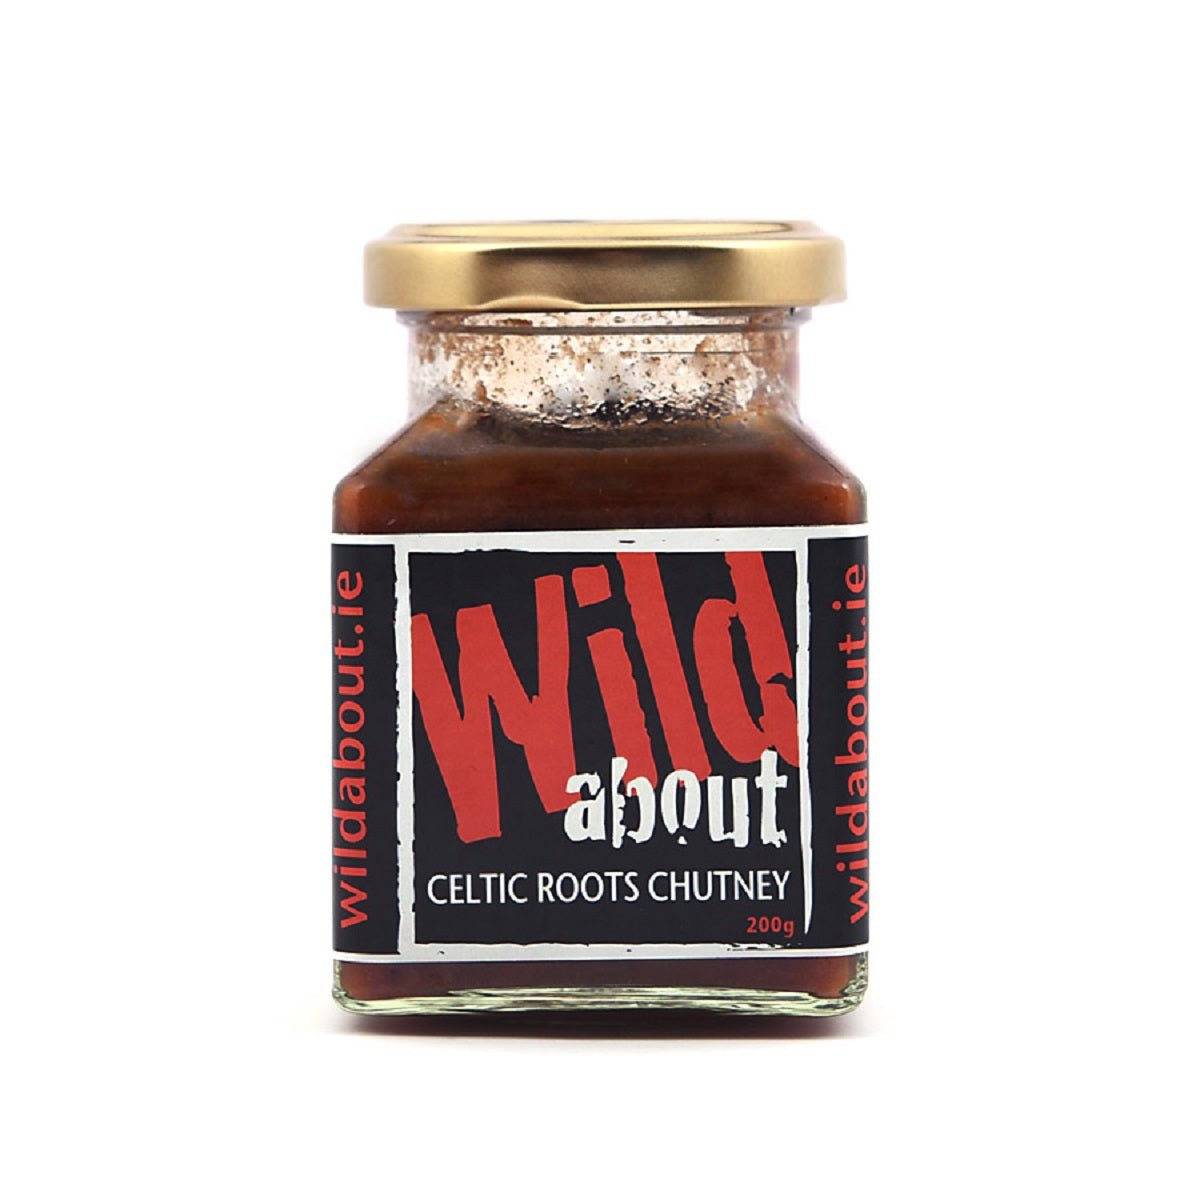 Wild About Celtic Roots Chutney 200g